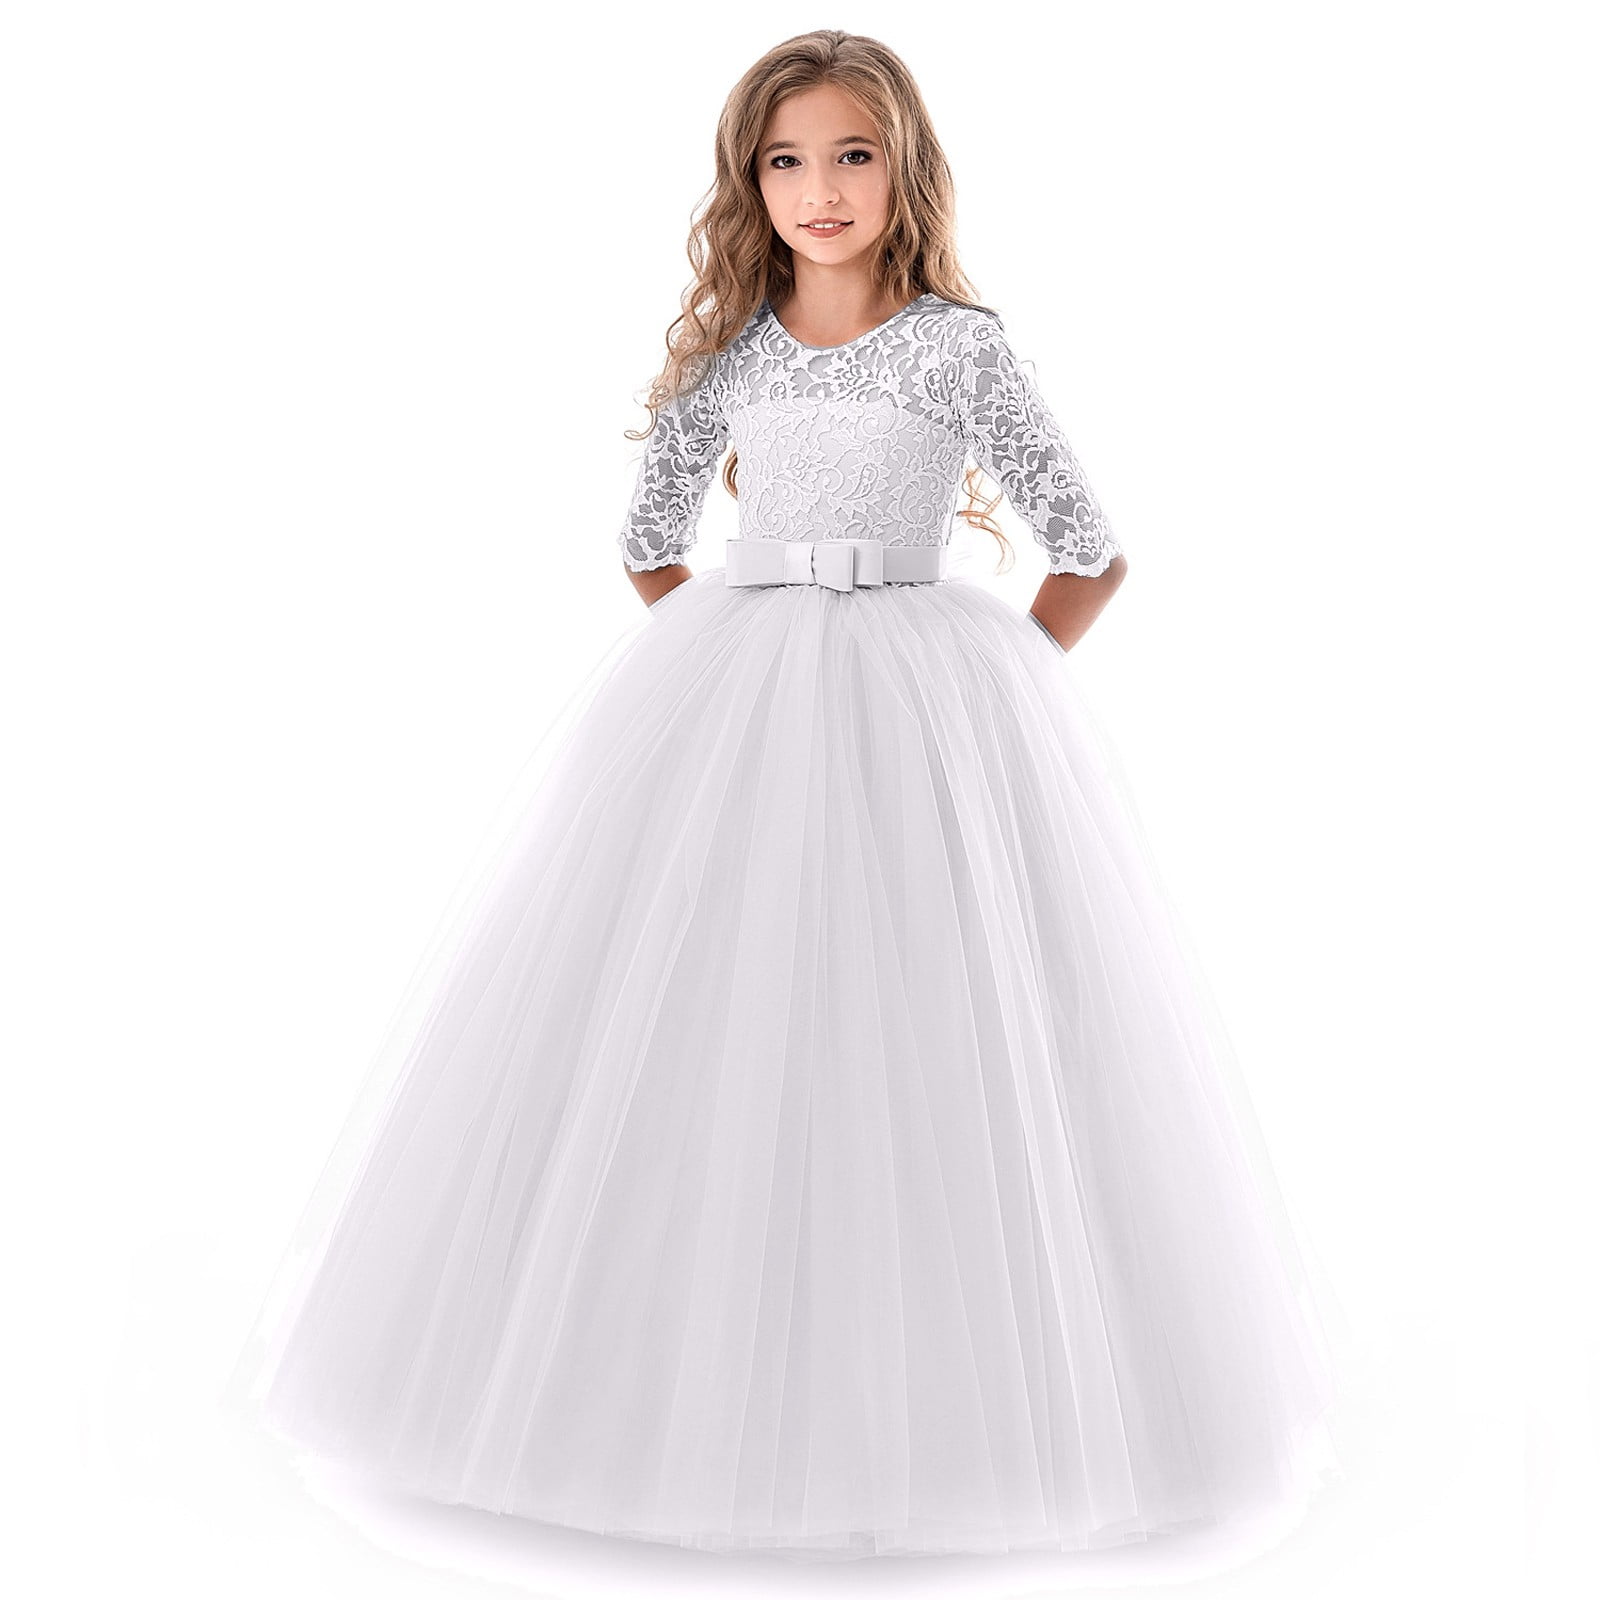 Aayomet Tween Girls Dresses Girls Vintage Lace Dresses Long Sleeve Tulle  A-Line Princess Wedding Party Dress with Pom Pom Flower Girl Dress,A 4-5  Years - Walmart.com